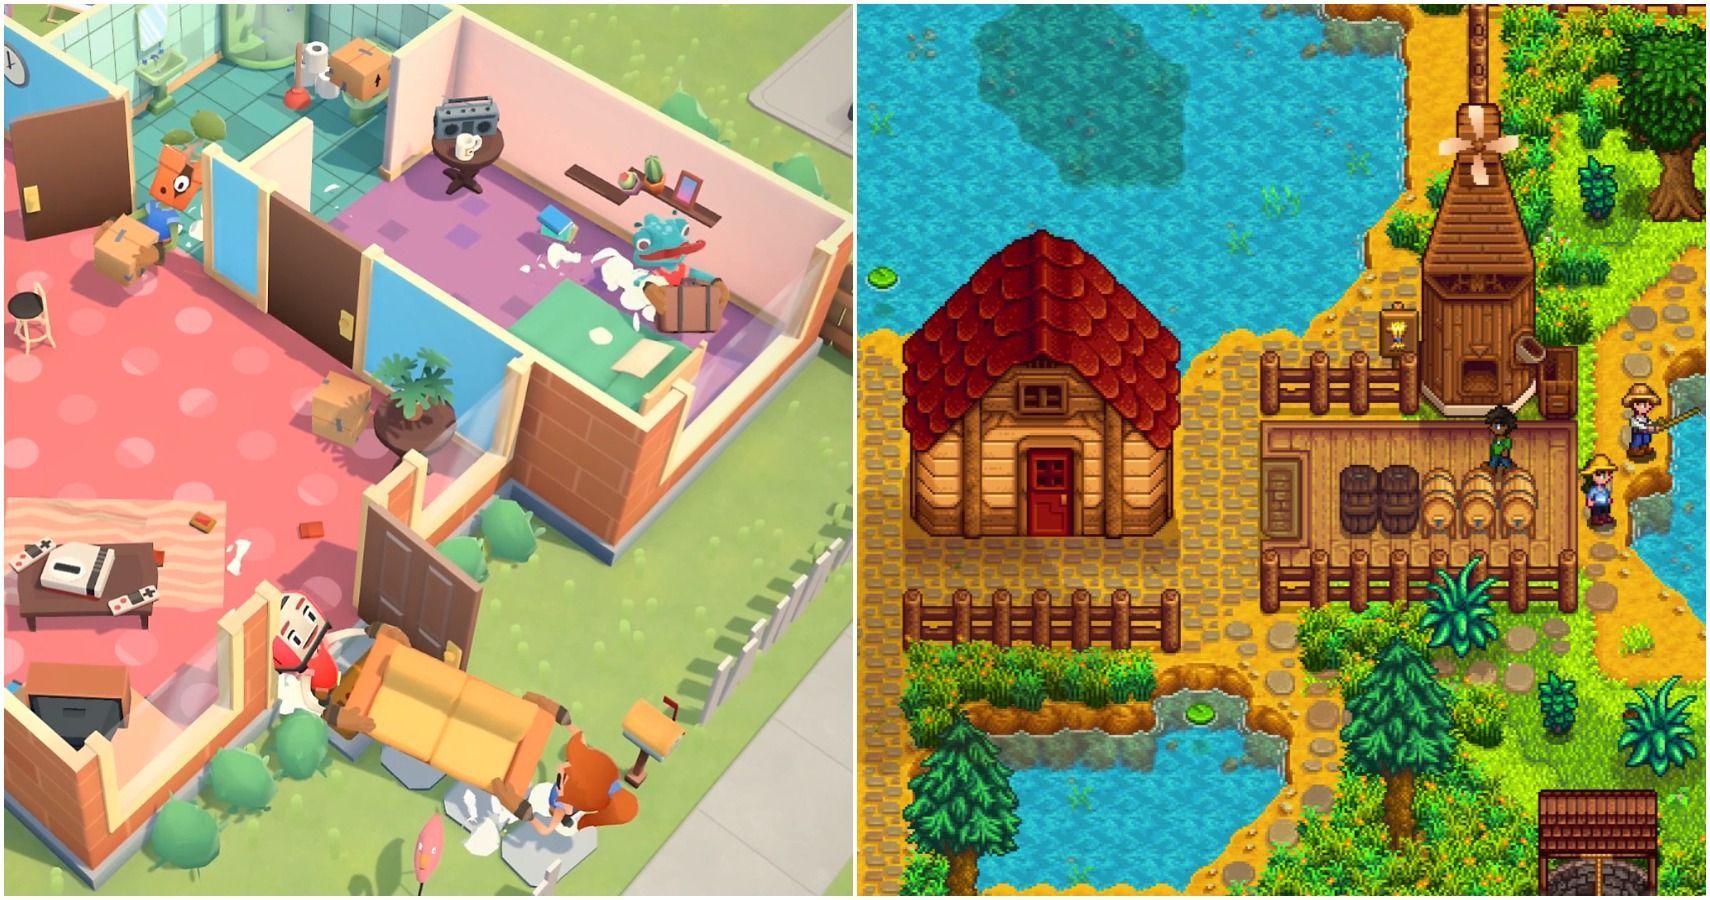 10 Nintendo Switch Games To Play If You Love Animal Crossing